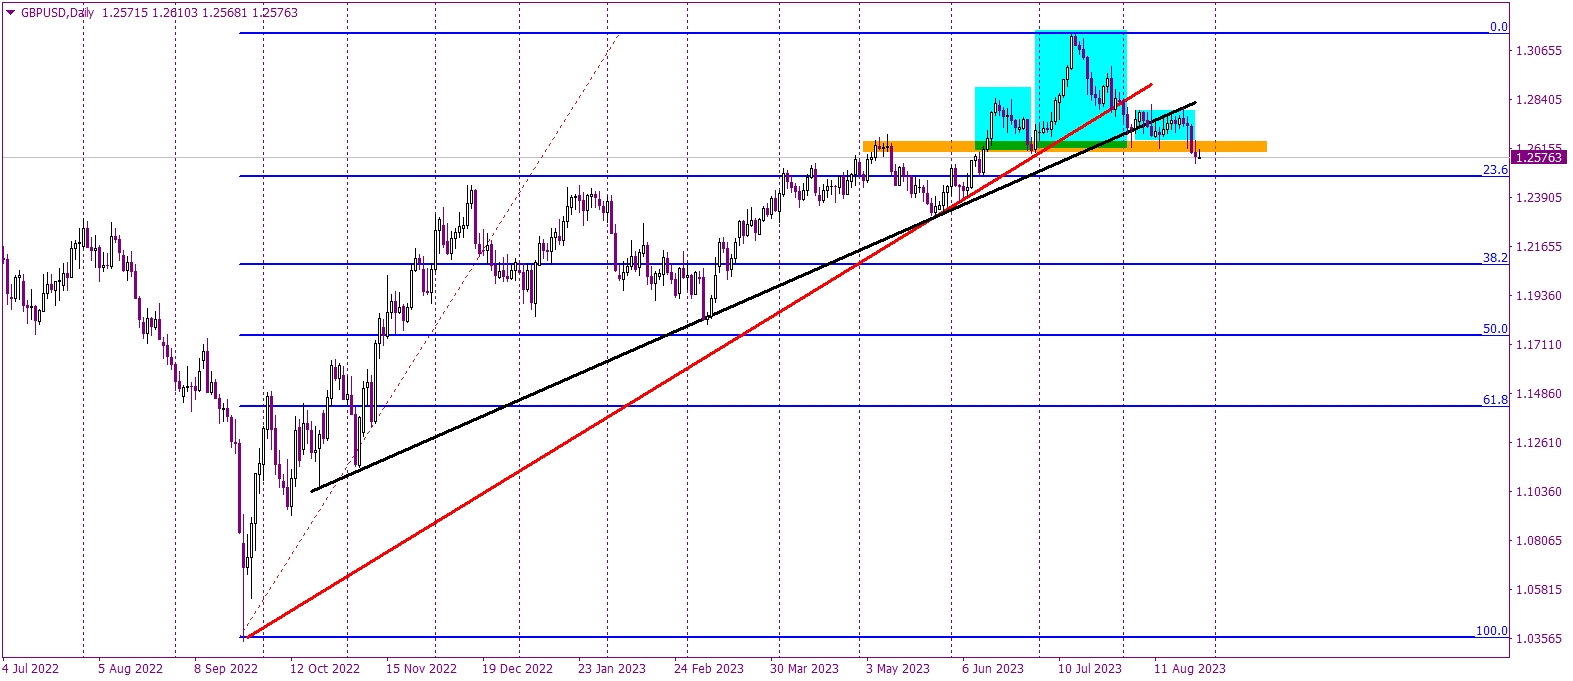 The GBPUSD Shift: Decoding the Head and Shoulders Signal